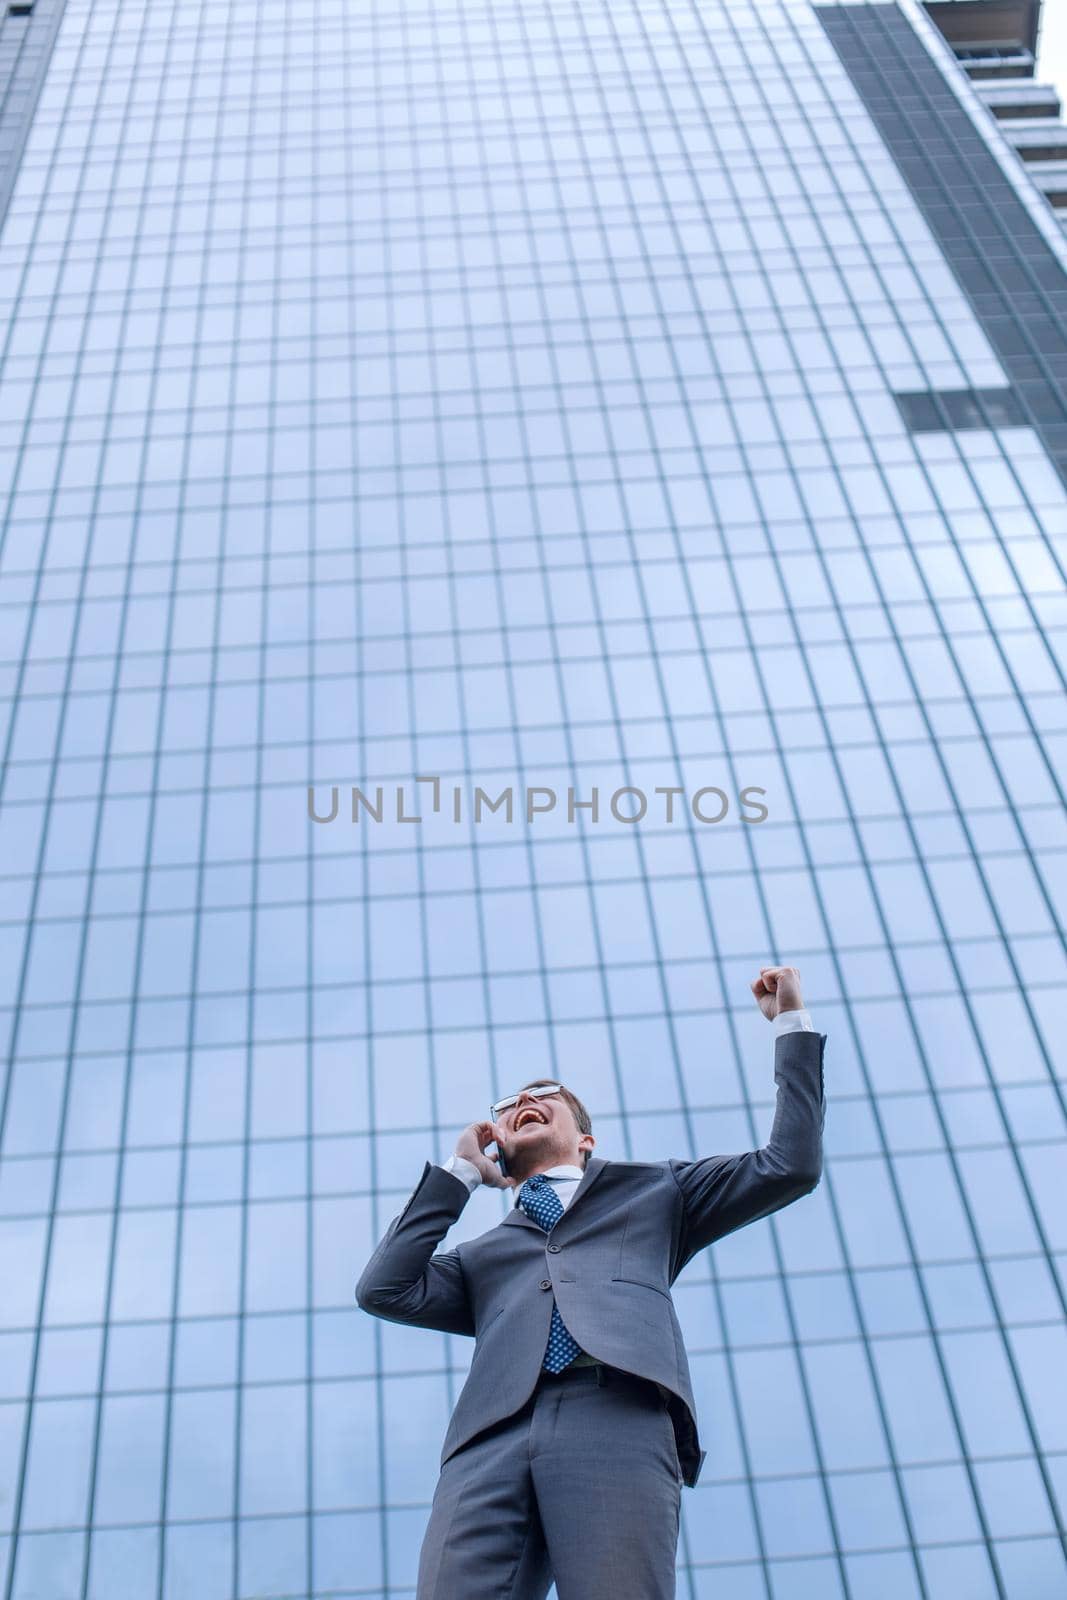 happy businesswoman with smartphone standing next to an office building. photo with copy space